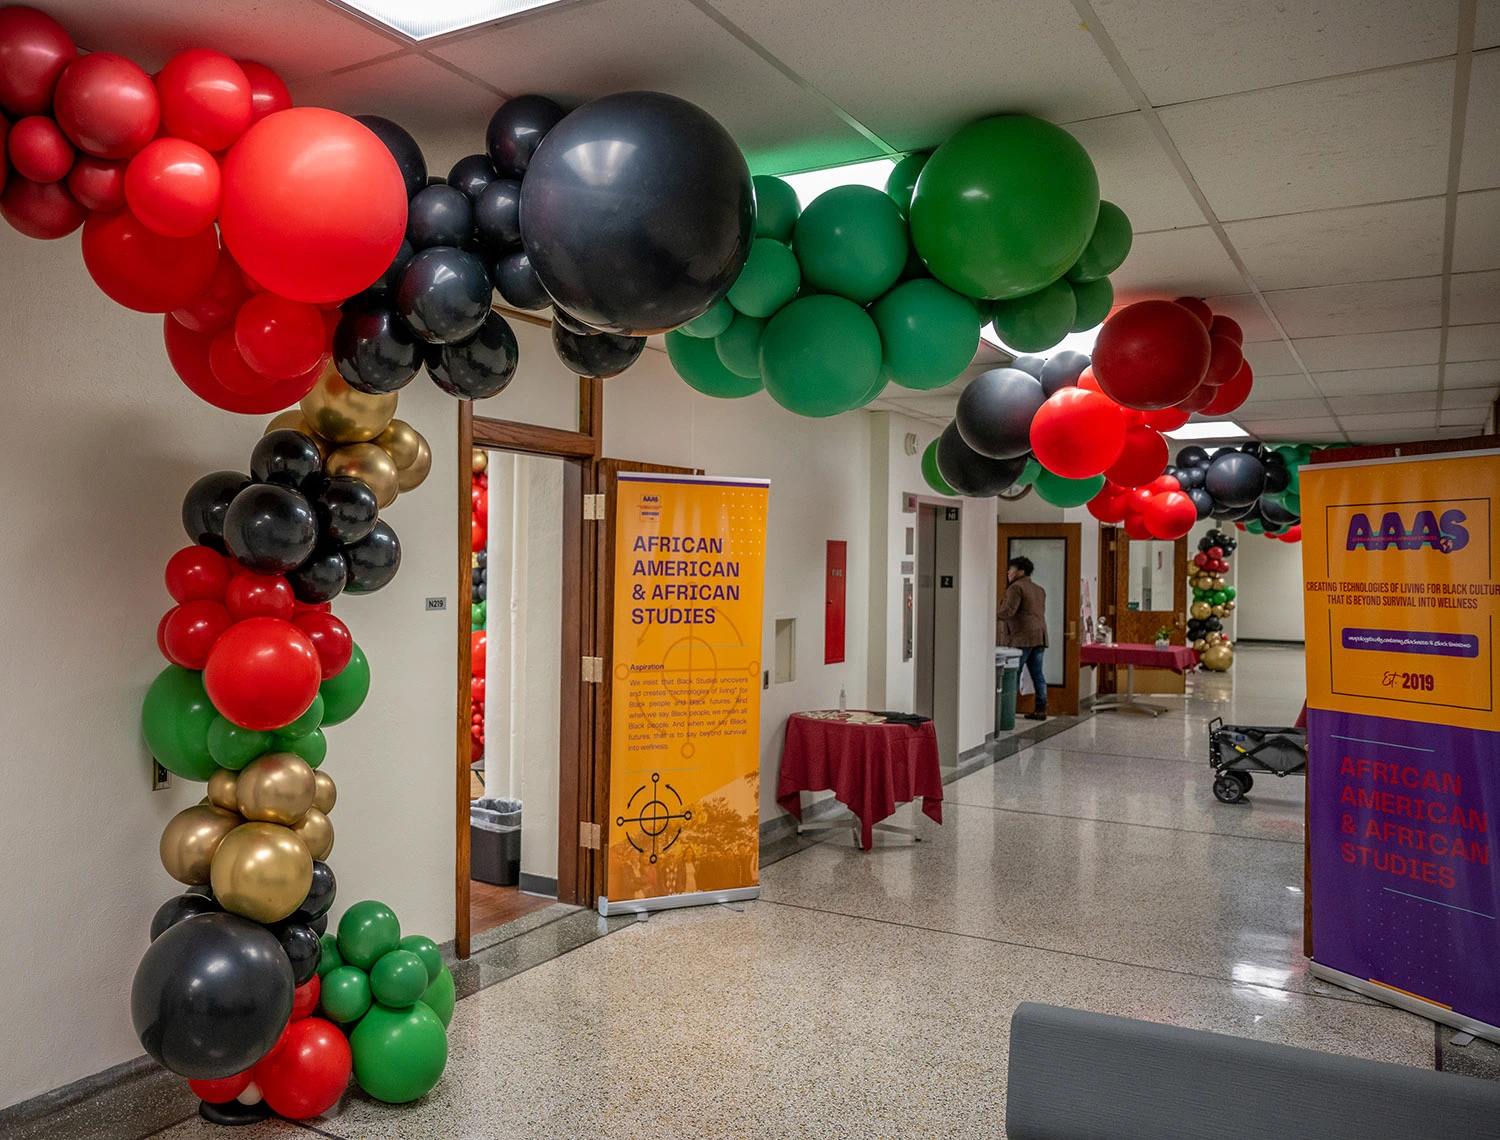 Balloon arch over the entrance to the new African and African American Studies department